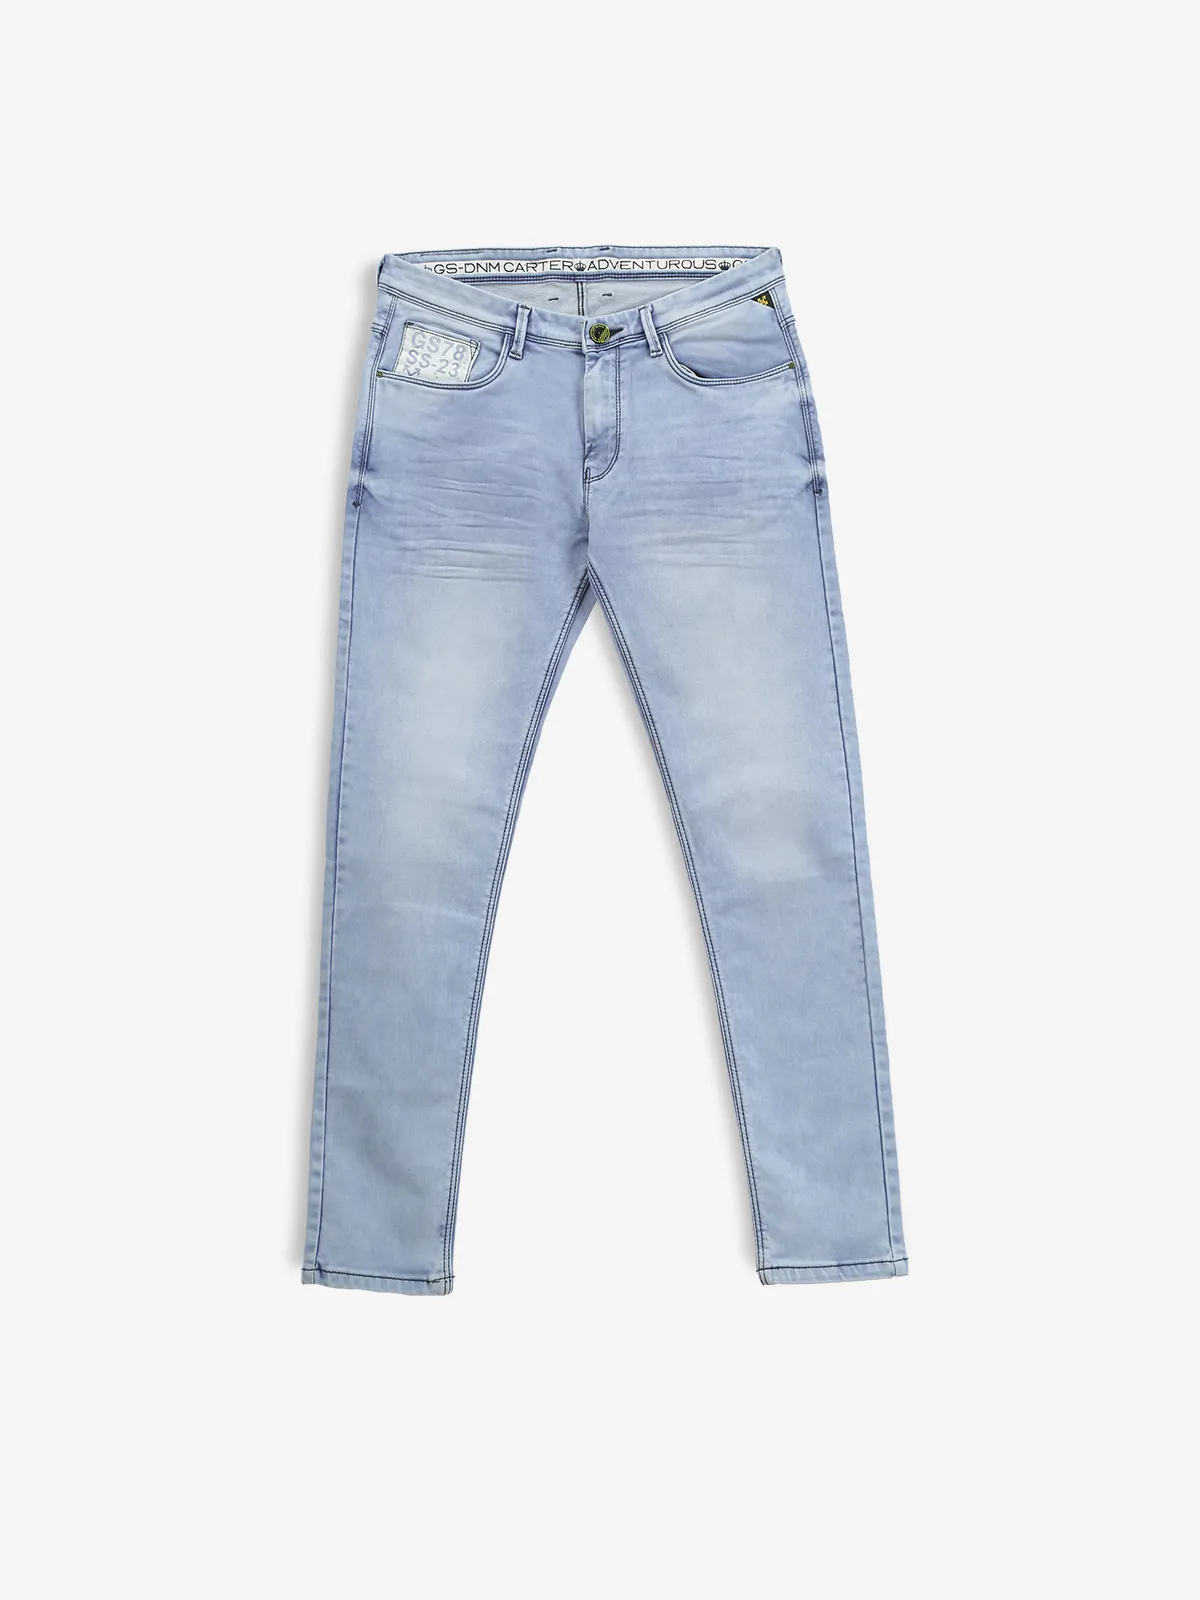 GS78 light blue washed casual jeans